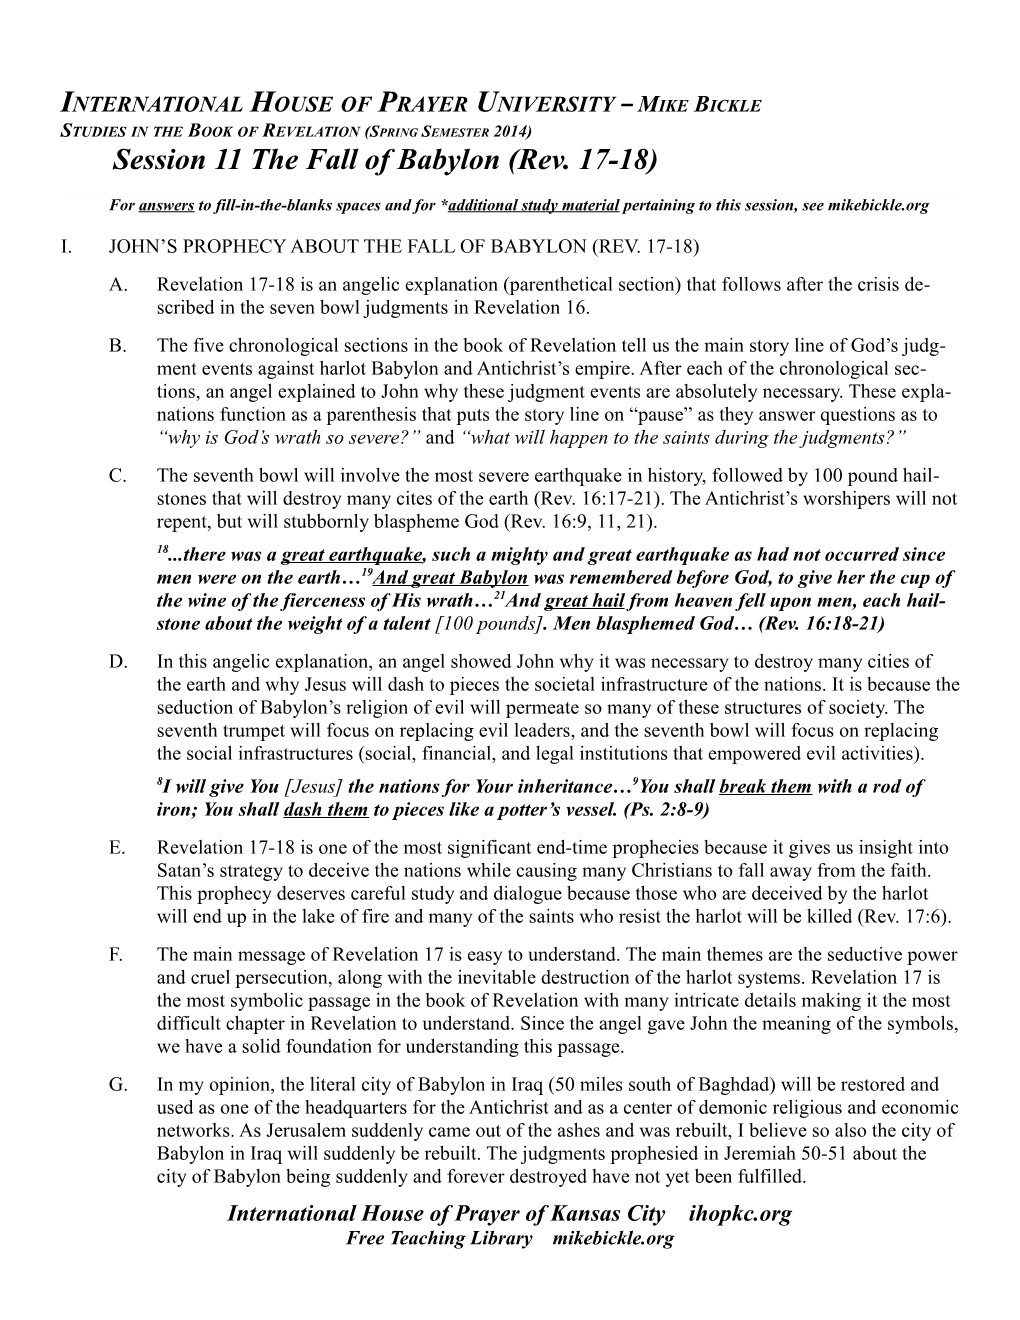 Studies in the Book of Revelation Mike Bickle Session 11 the Fall of Babylon (Rev. 17-18)Page